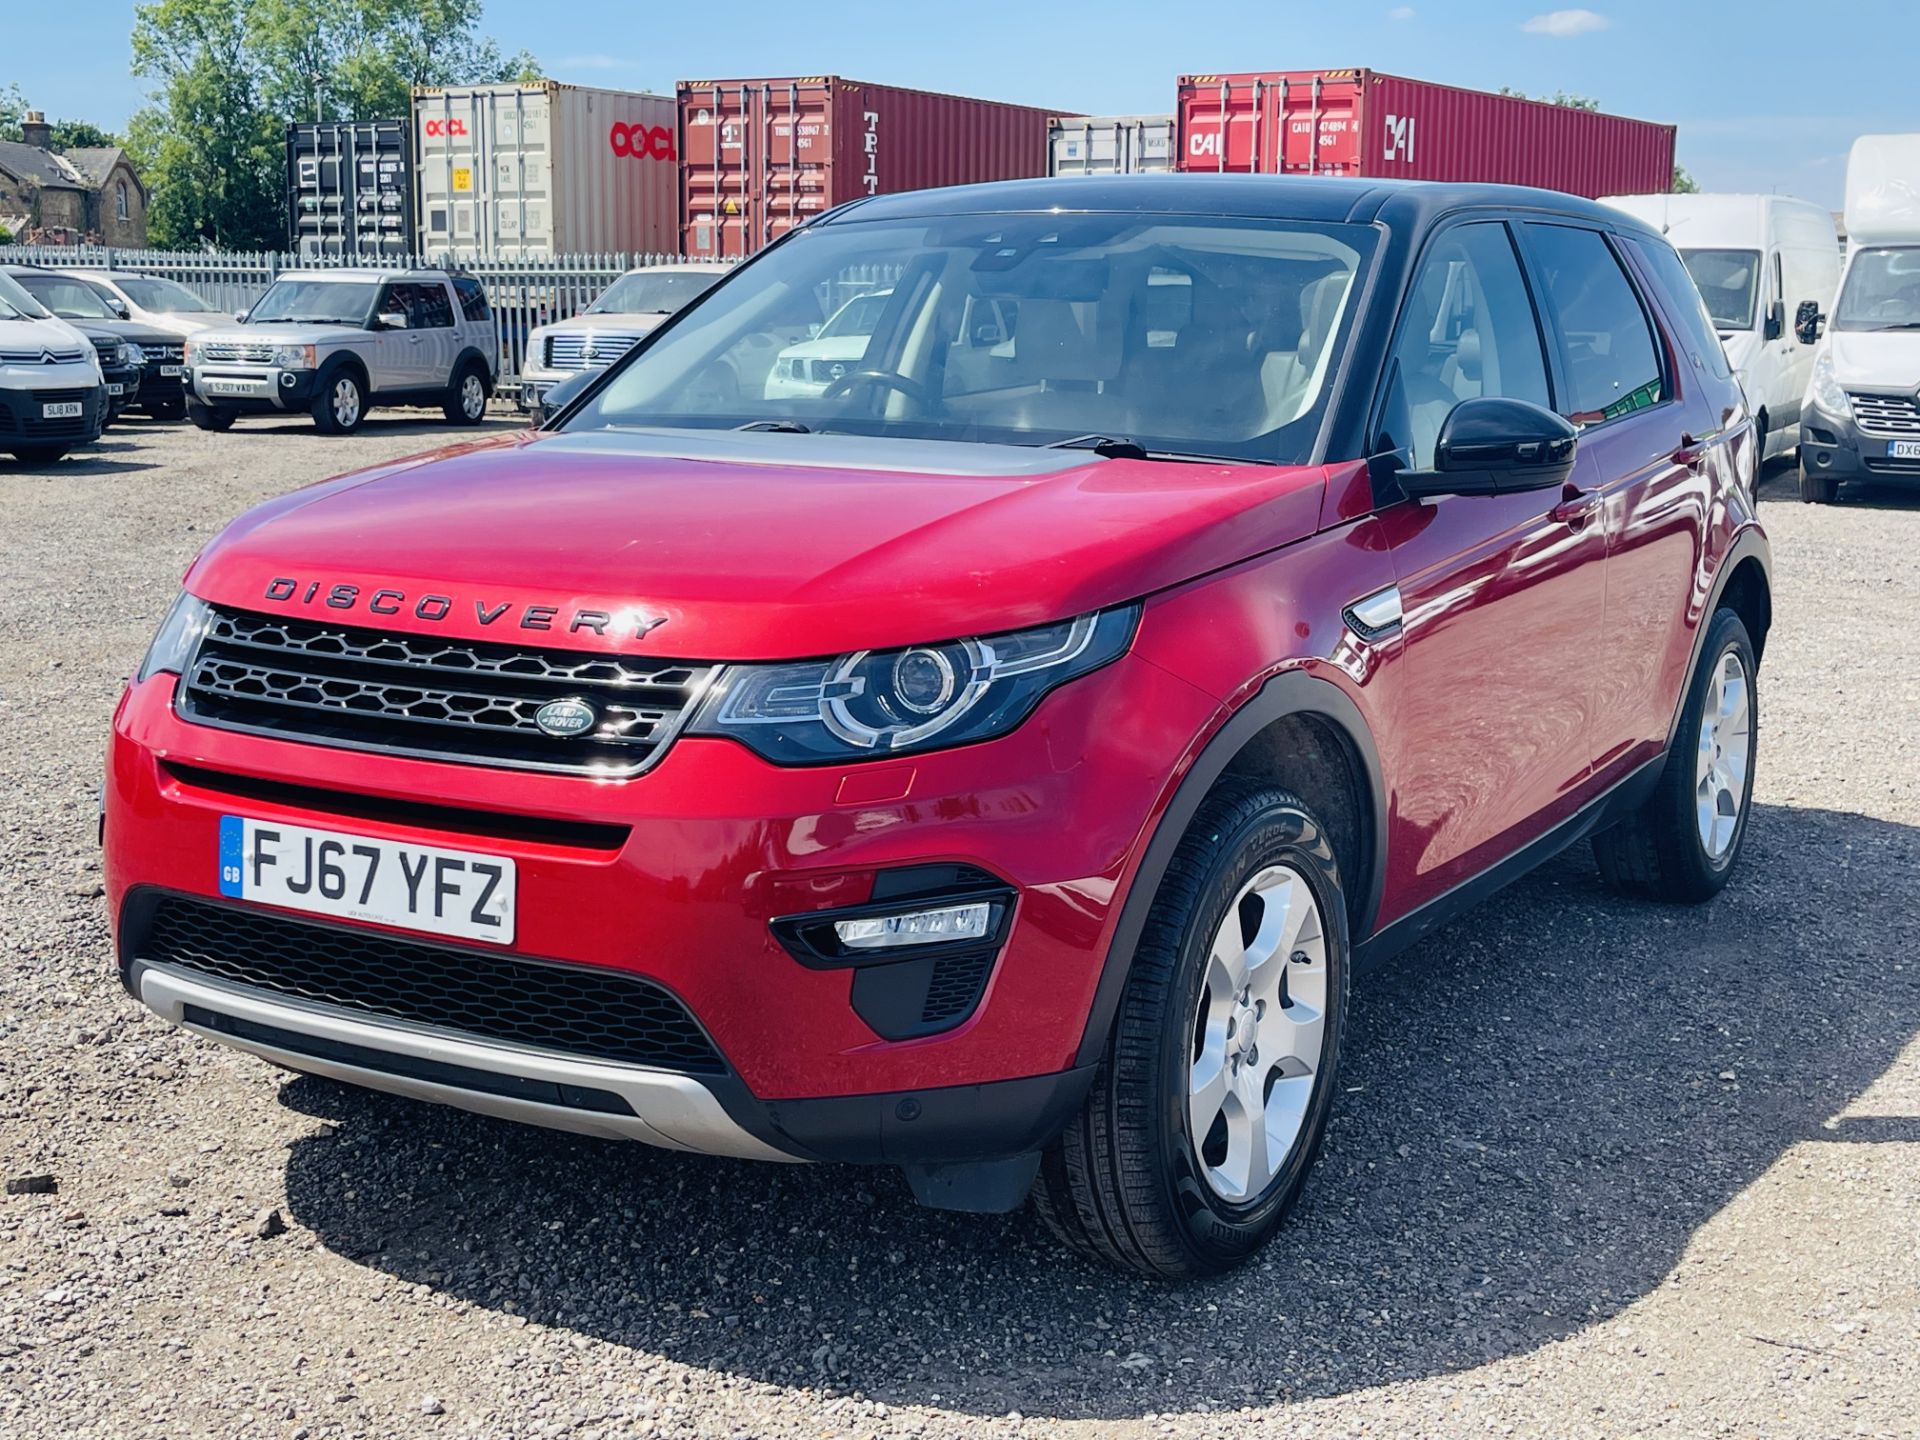 Land Rover Discovery Sport HSE 2.0 ED4 2017 '67 Reg' Sat Nav - Panoramic Glass Roof - ULEZ Compliant - Image 5 of 33